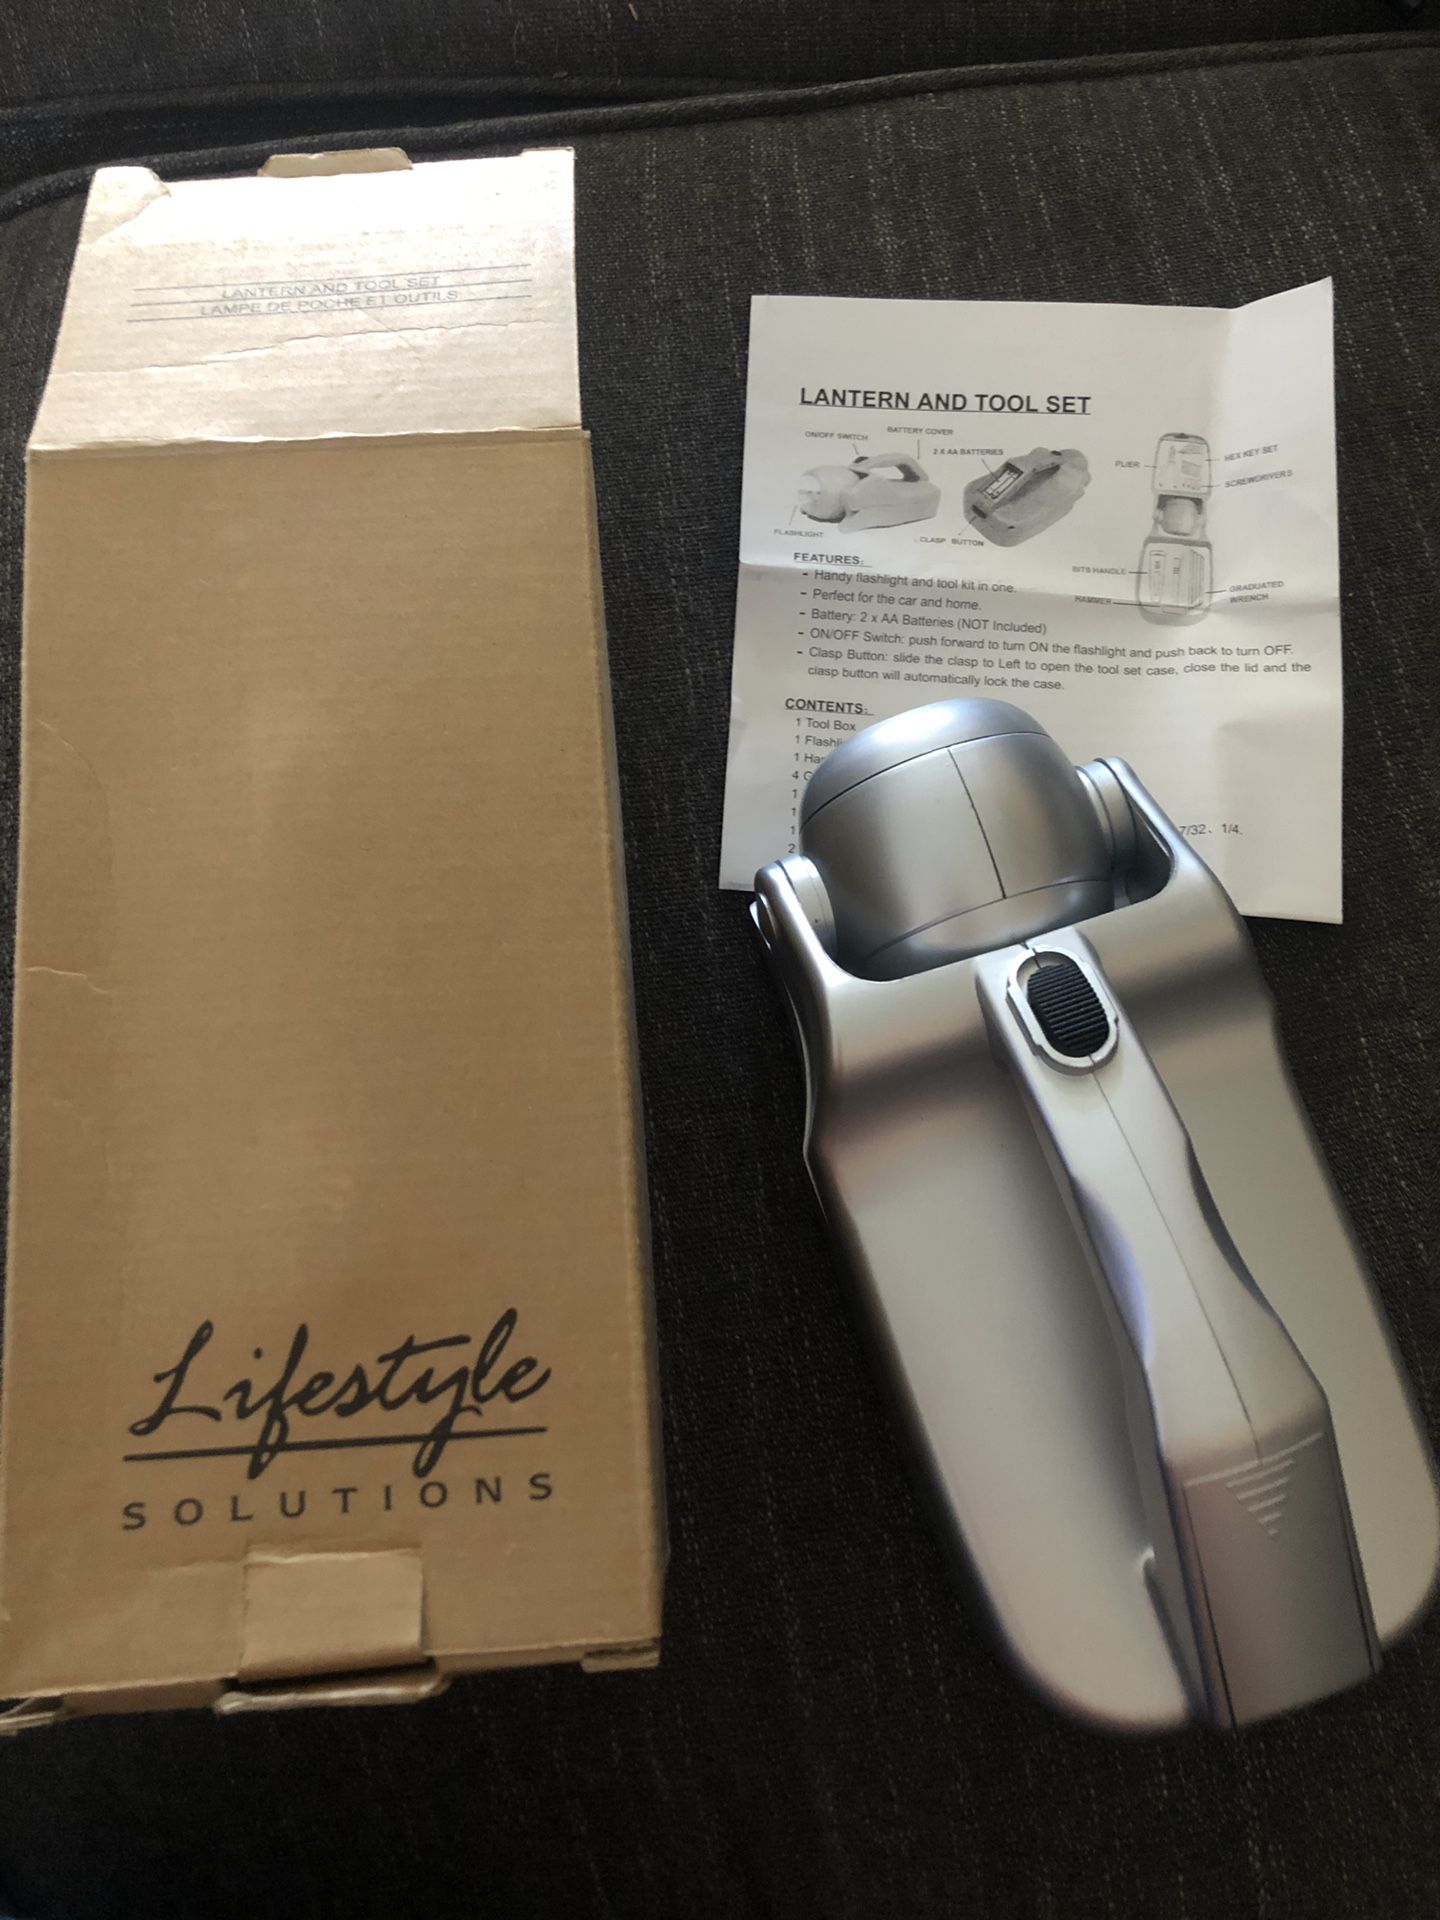 Lifestyle solutions lantern and to set- new in box